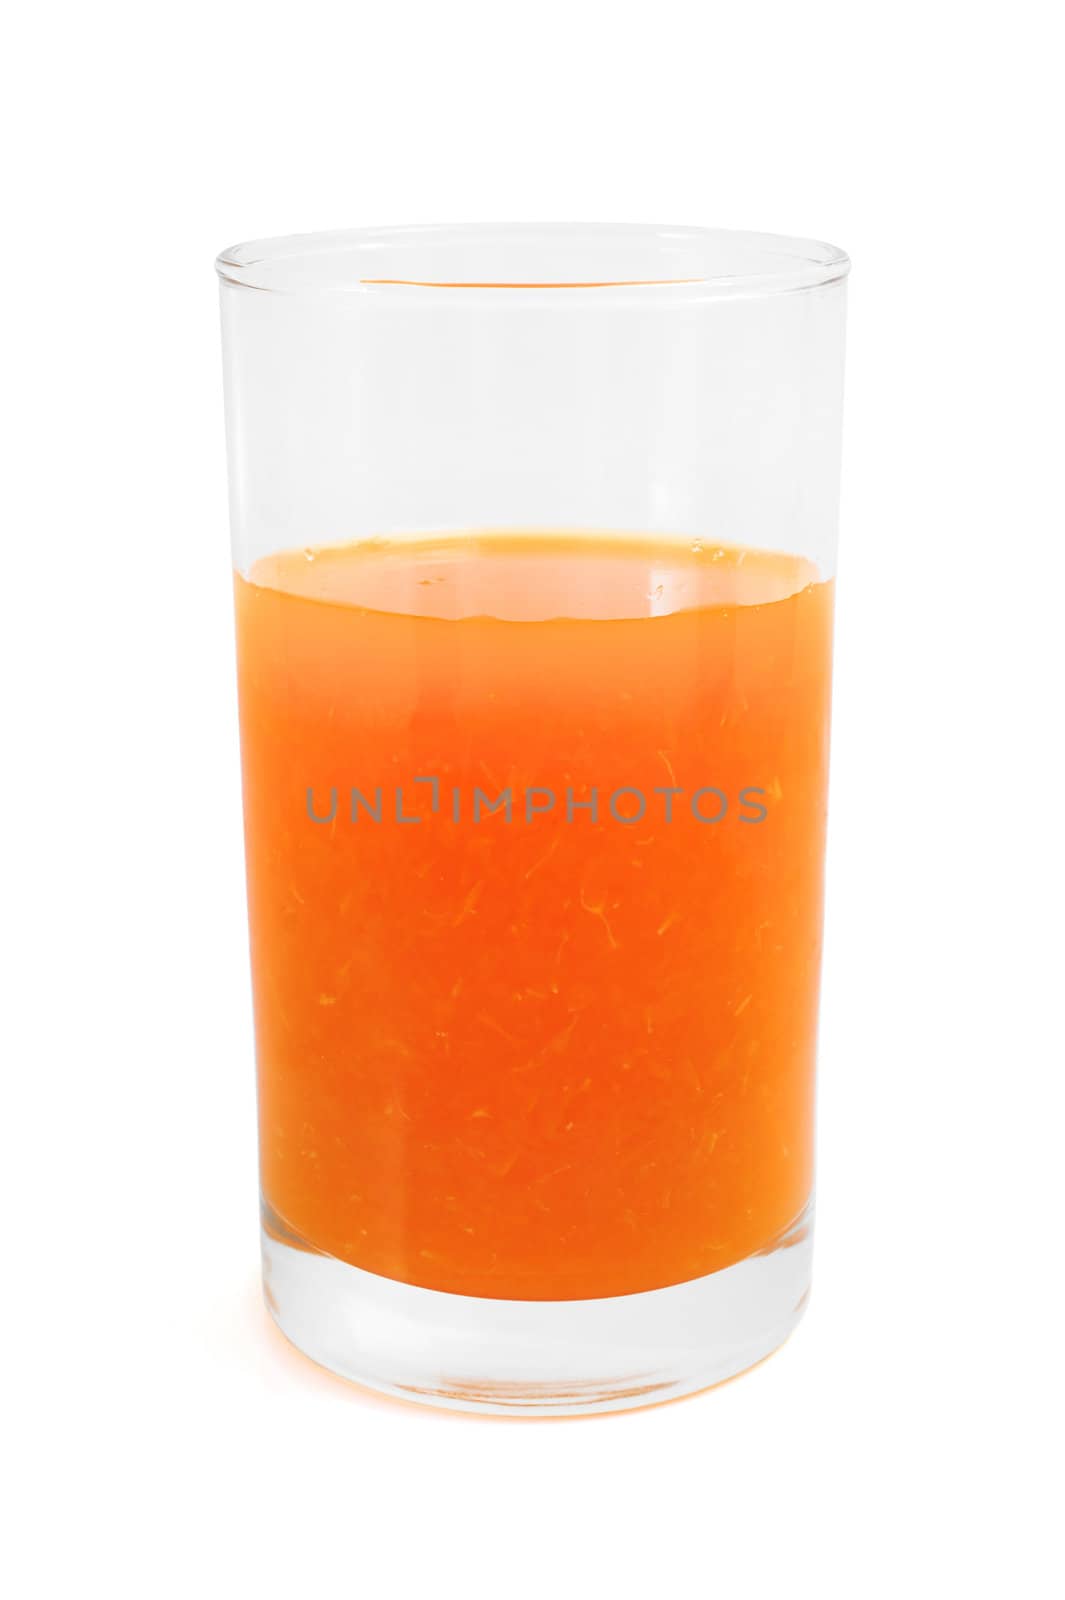 Orange Juice with clipping path